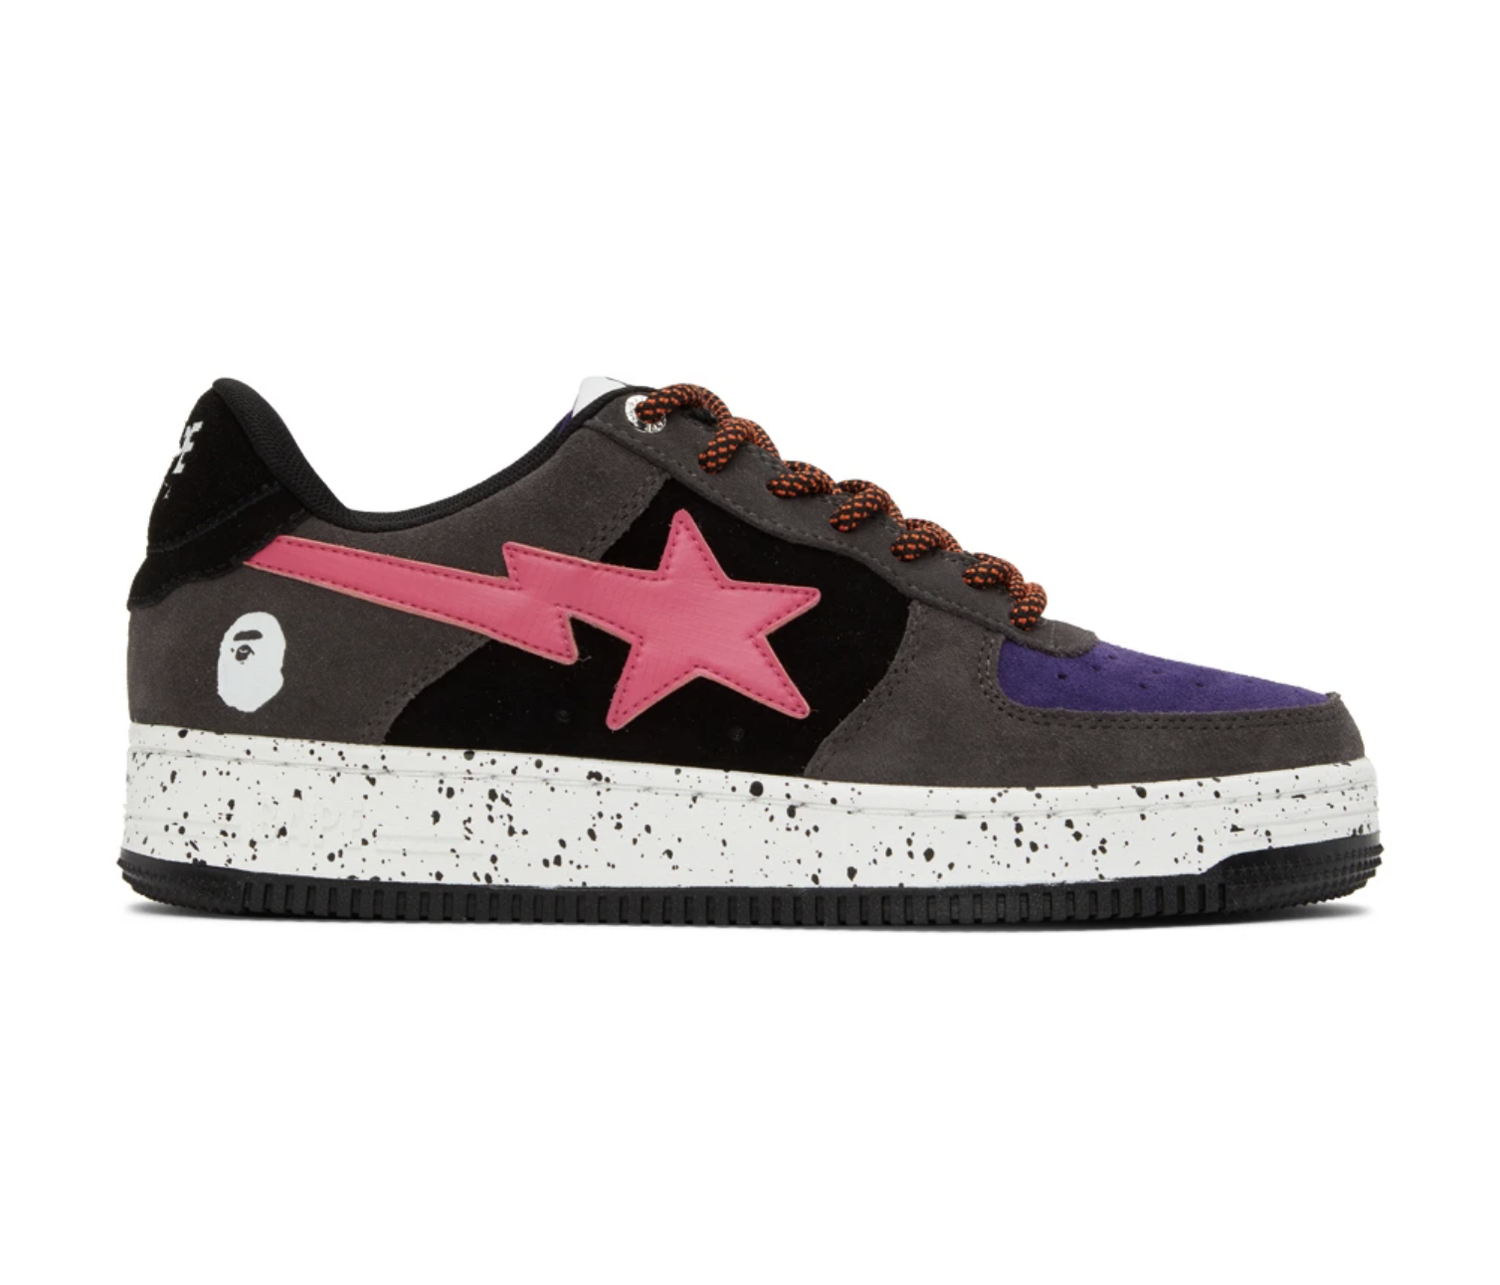 Now Available: BAPE STA 2 